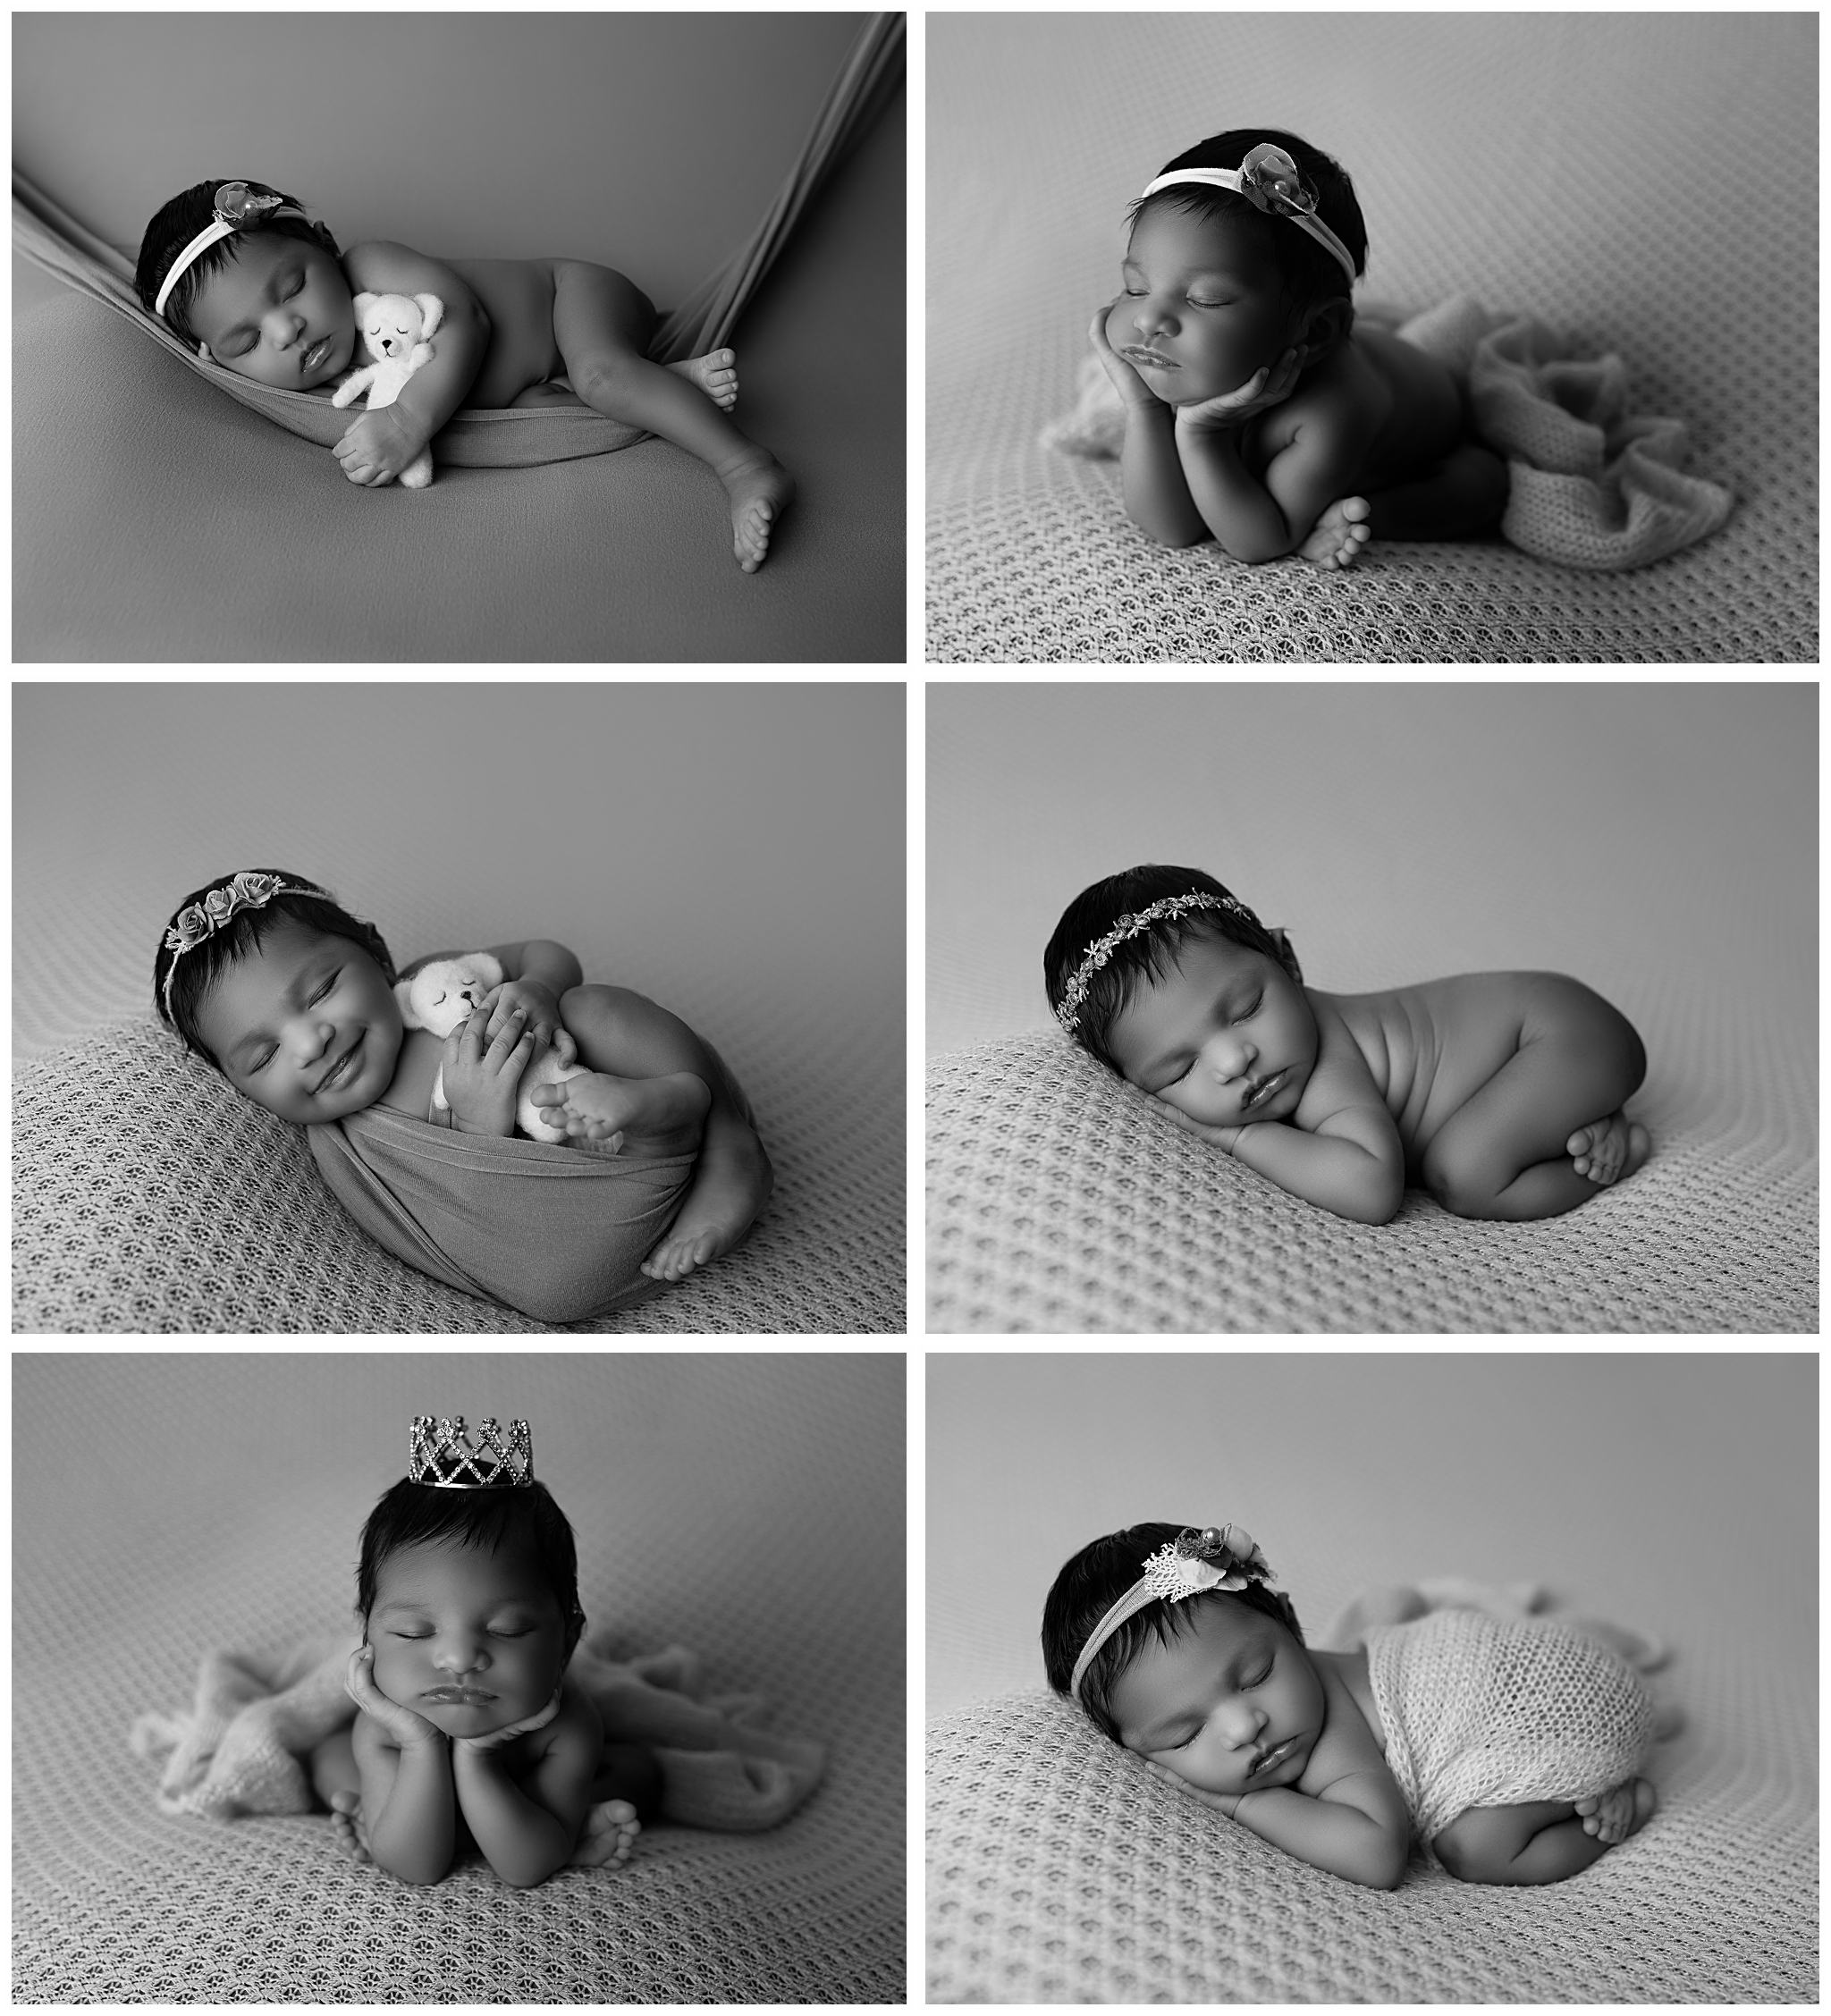 Black and white collage of sleeping baby in various posed newborn photography positions during newborn photoshoot.